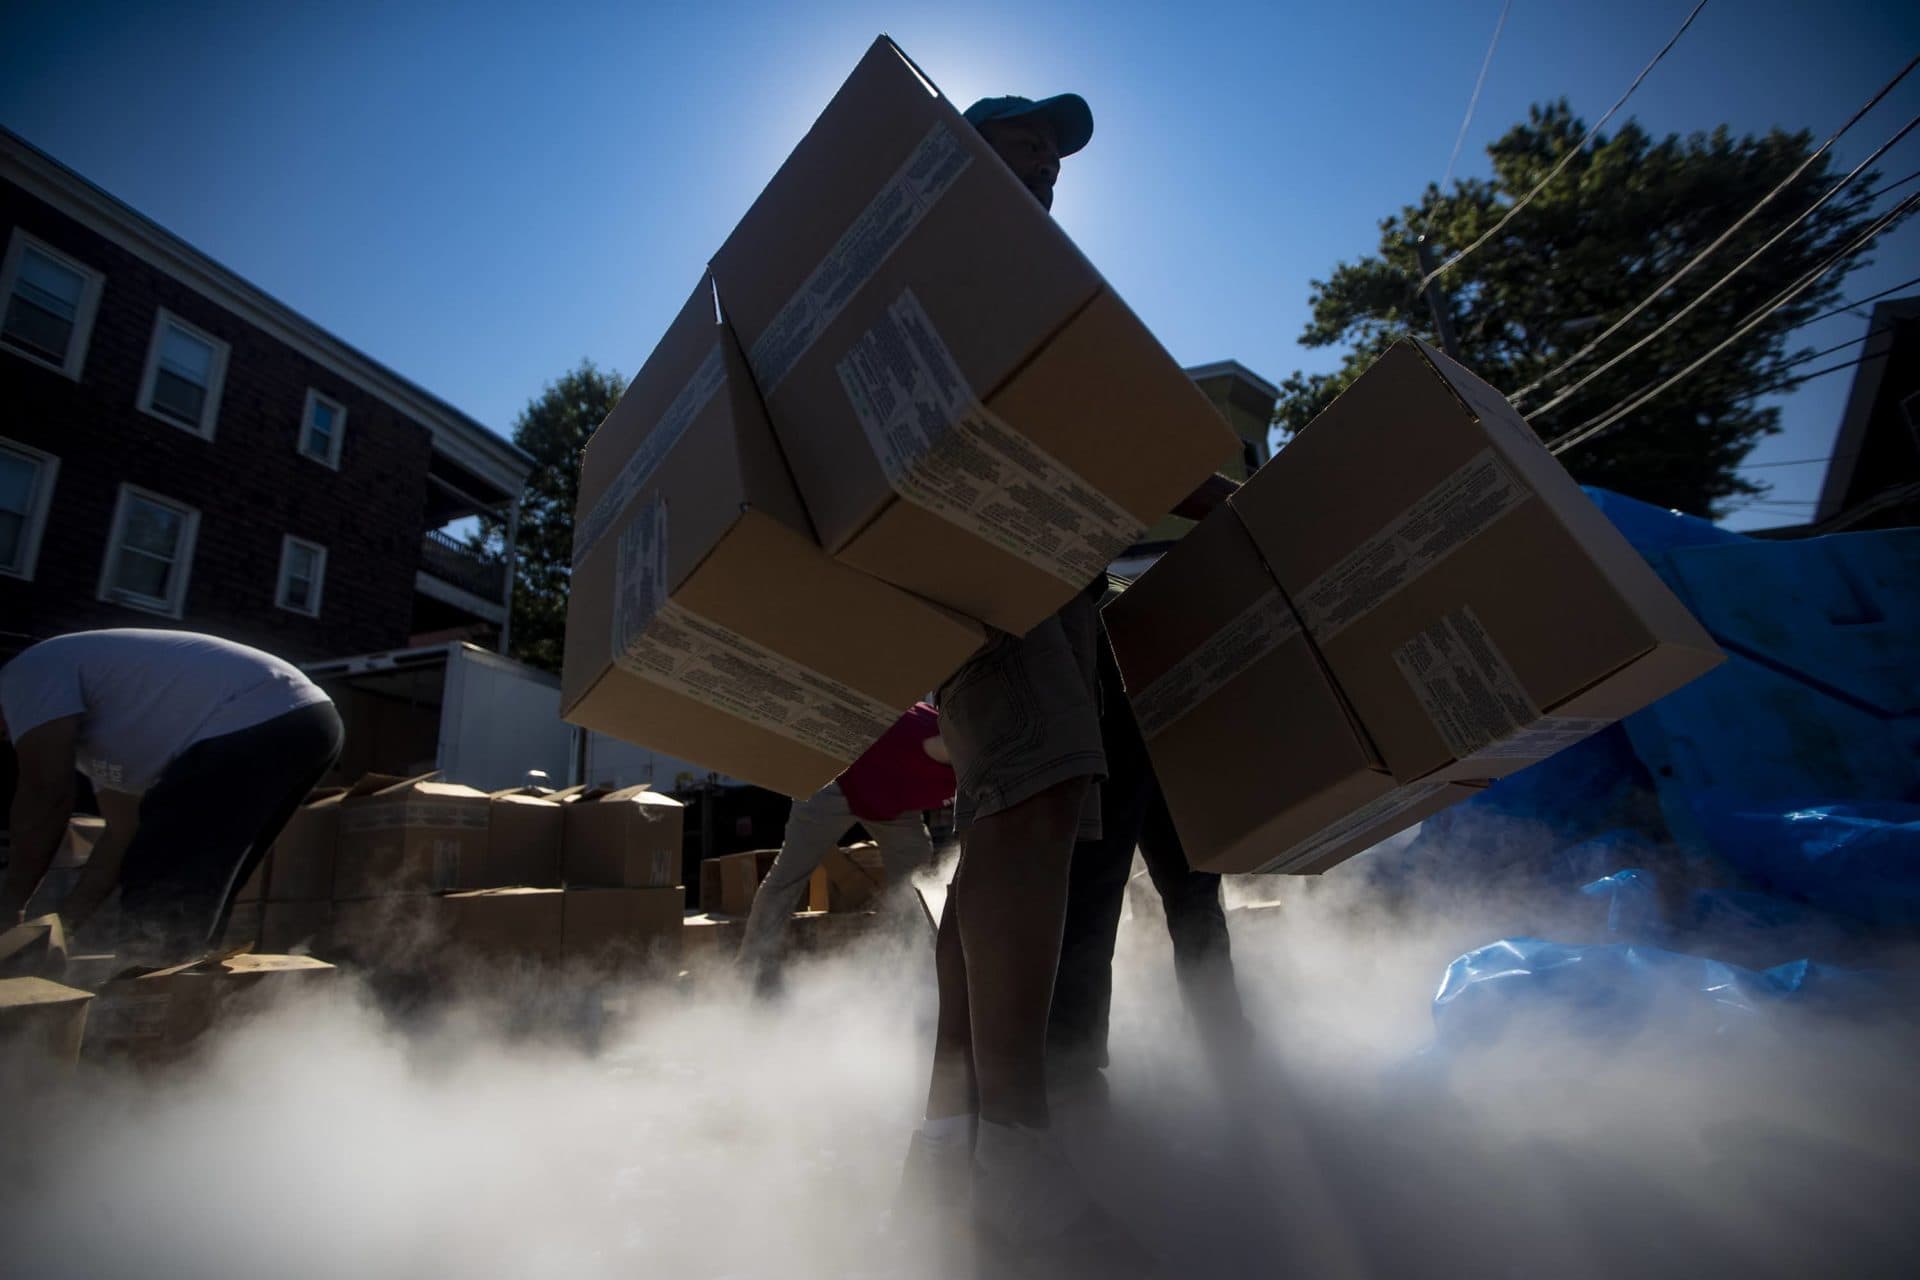 Workers at the Acme Ice Company in Cambridge load 50,000 pounds of dry ice into boxes to be shipped out to various pharmaceutical companies in the area for storing vaccine samples of COVID-19. (Jesse Costa/WBUR)